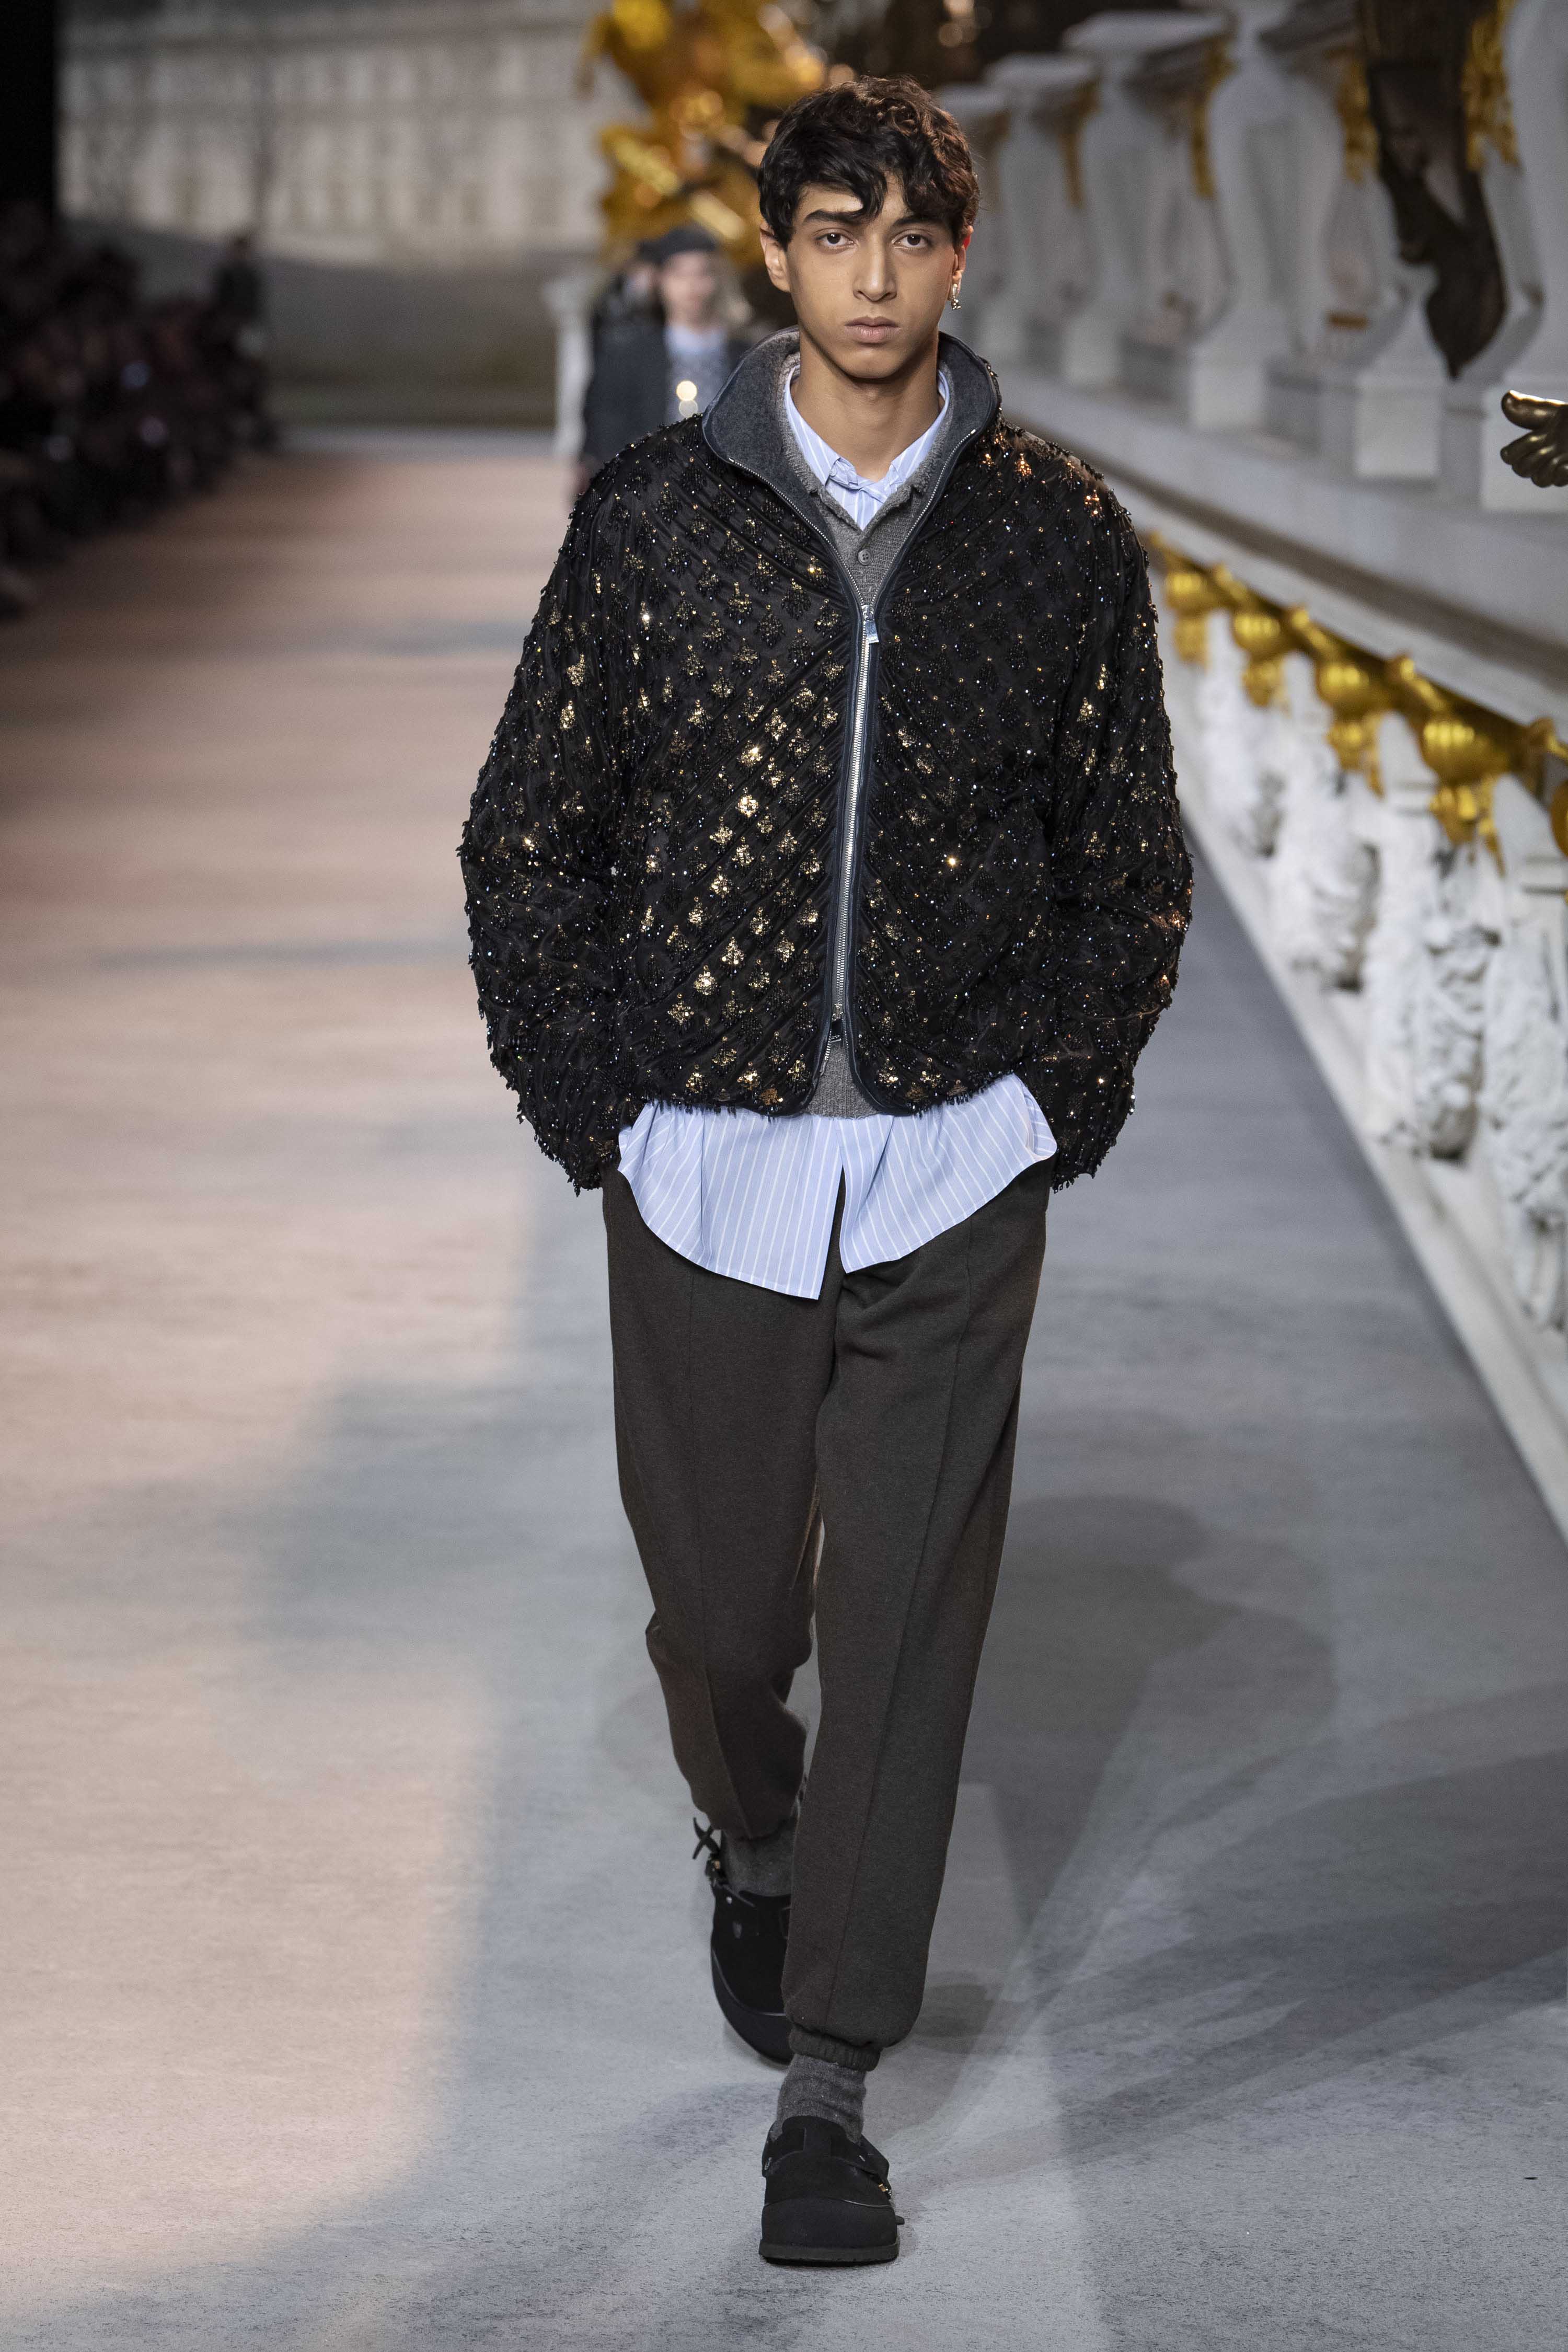 PFW: Discover Dior Men Winter 2021 Collection by Kim Jones